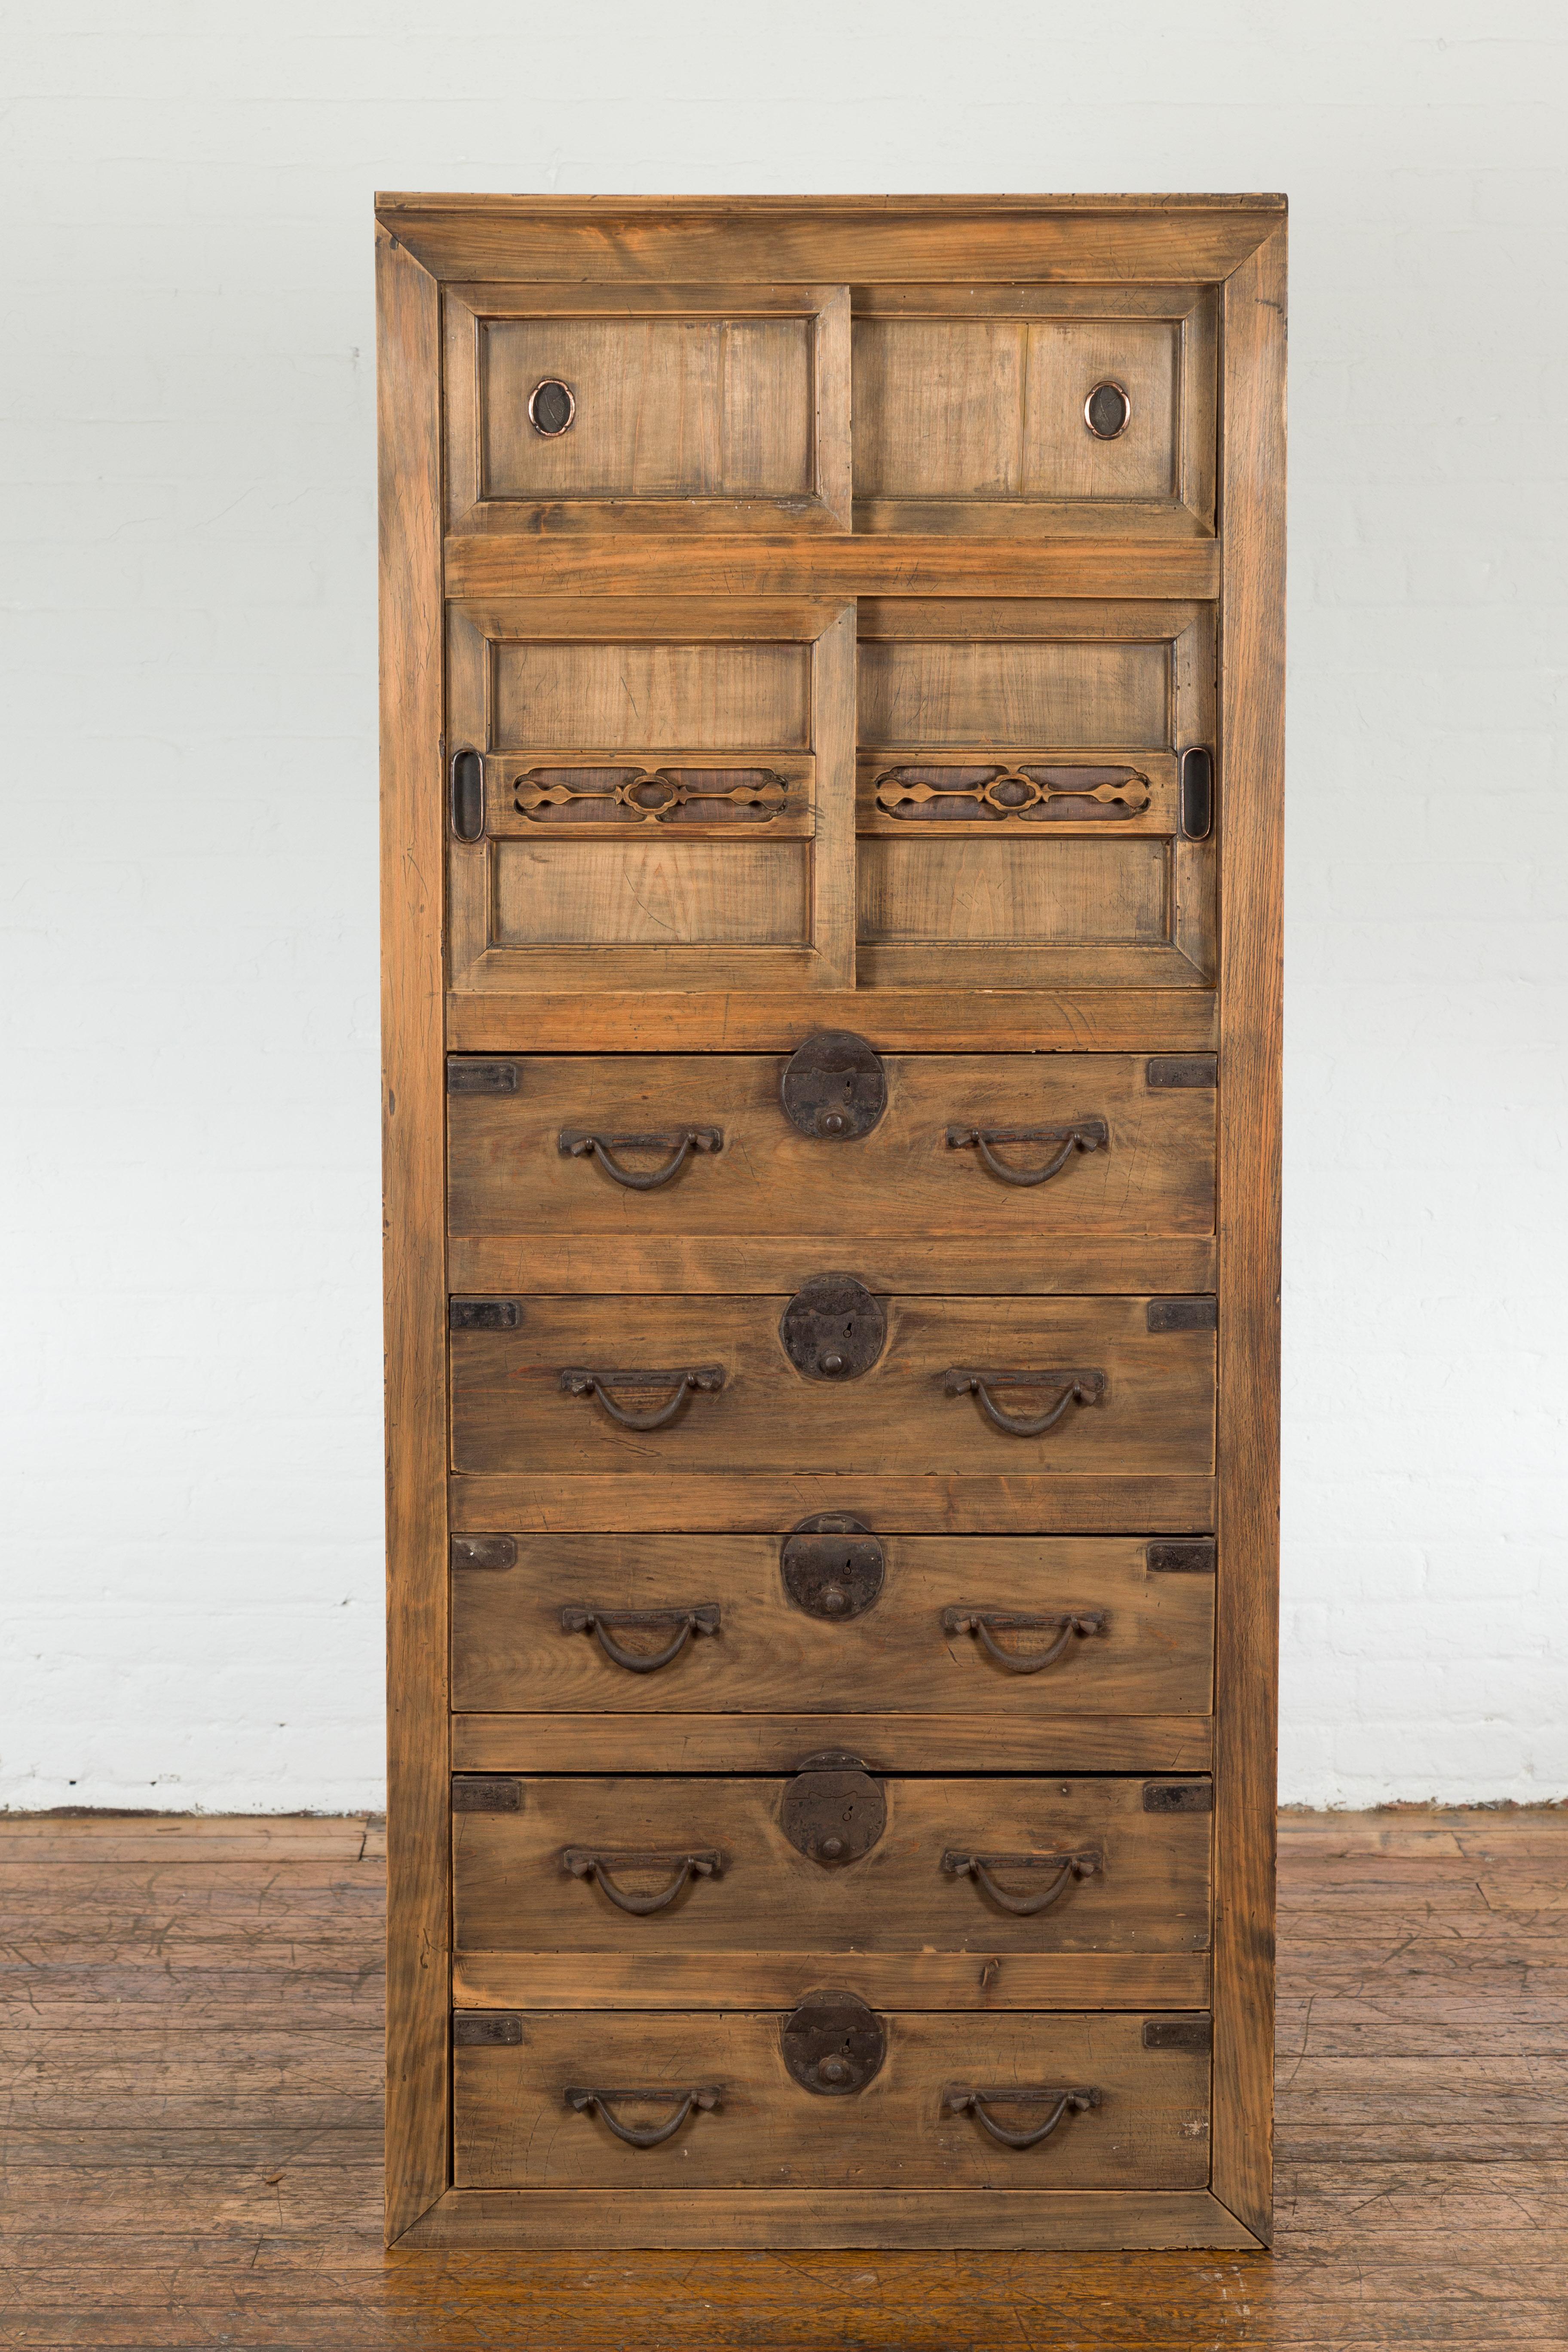 Carved Japanese Late Meiji Period Tansu Clothing Chest with Sliding Doors and Drawers